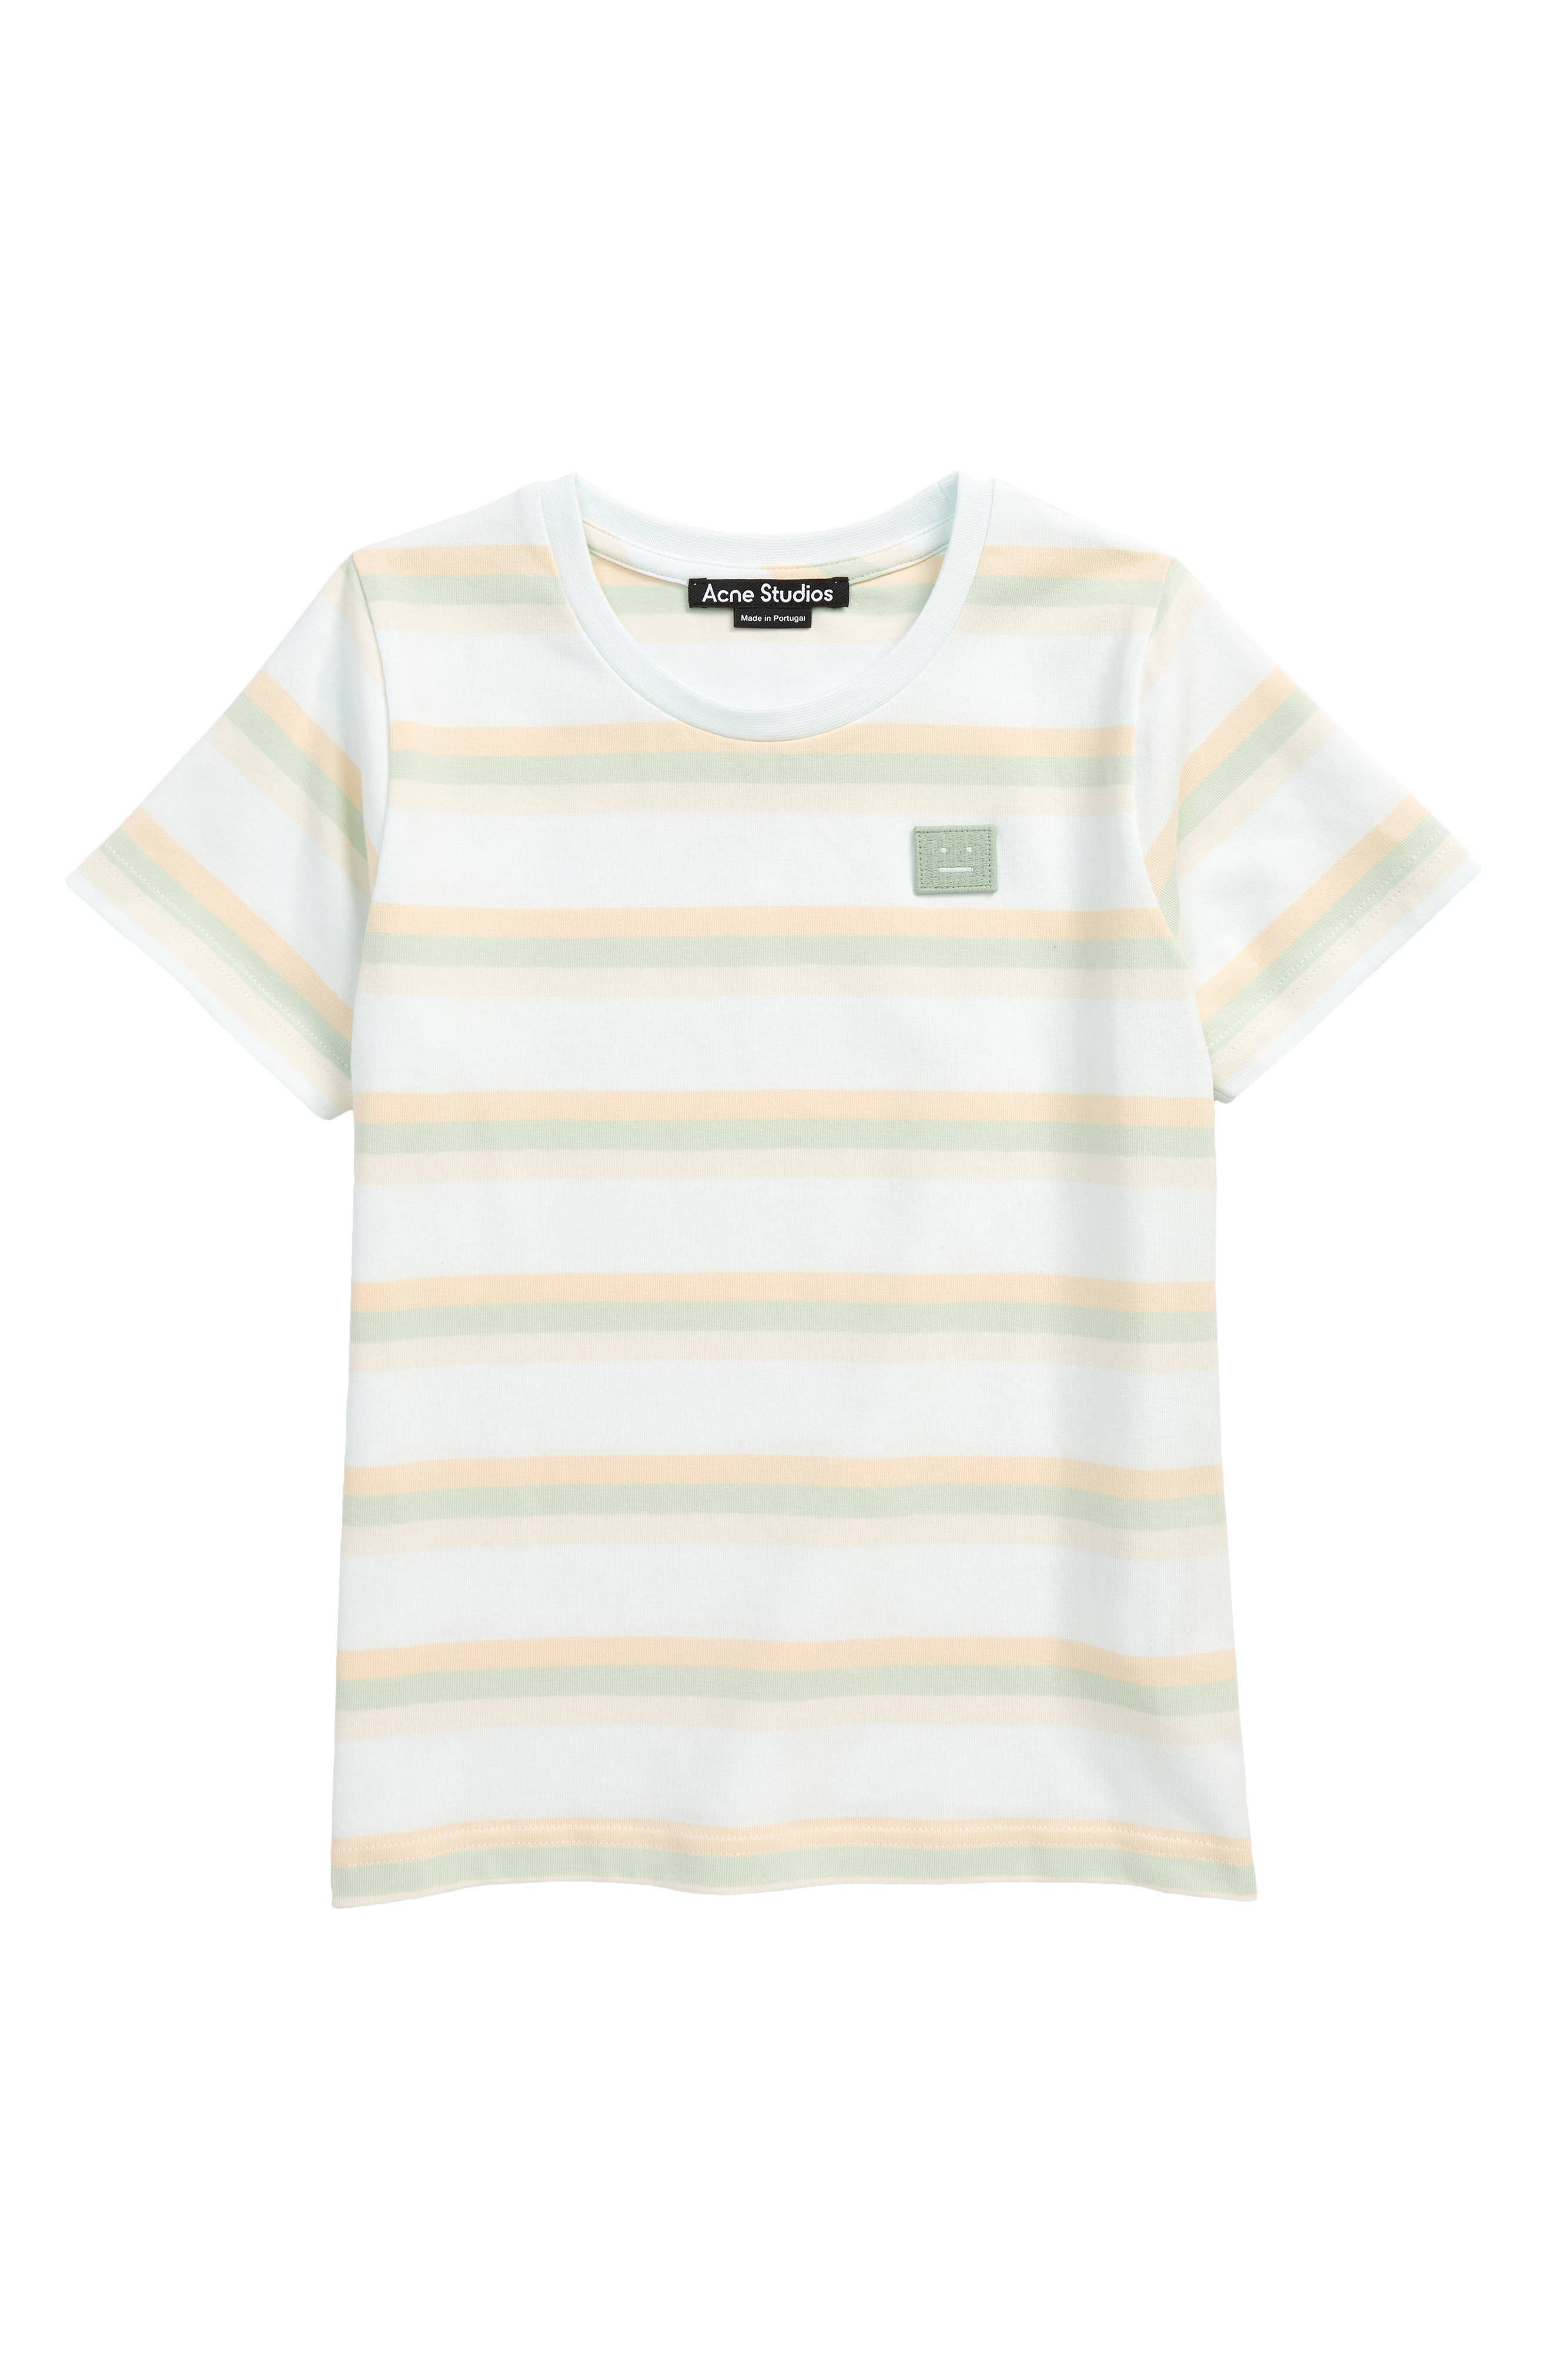 Acne Studios Kids' Mini Nash Stripe Face Patch T-Shirt in Pale Green at Nordstrom, Size 3-4Y Us